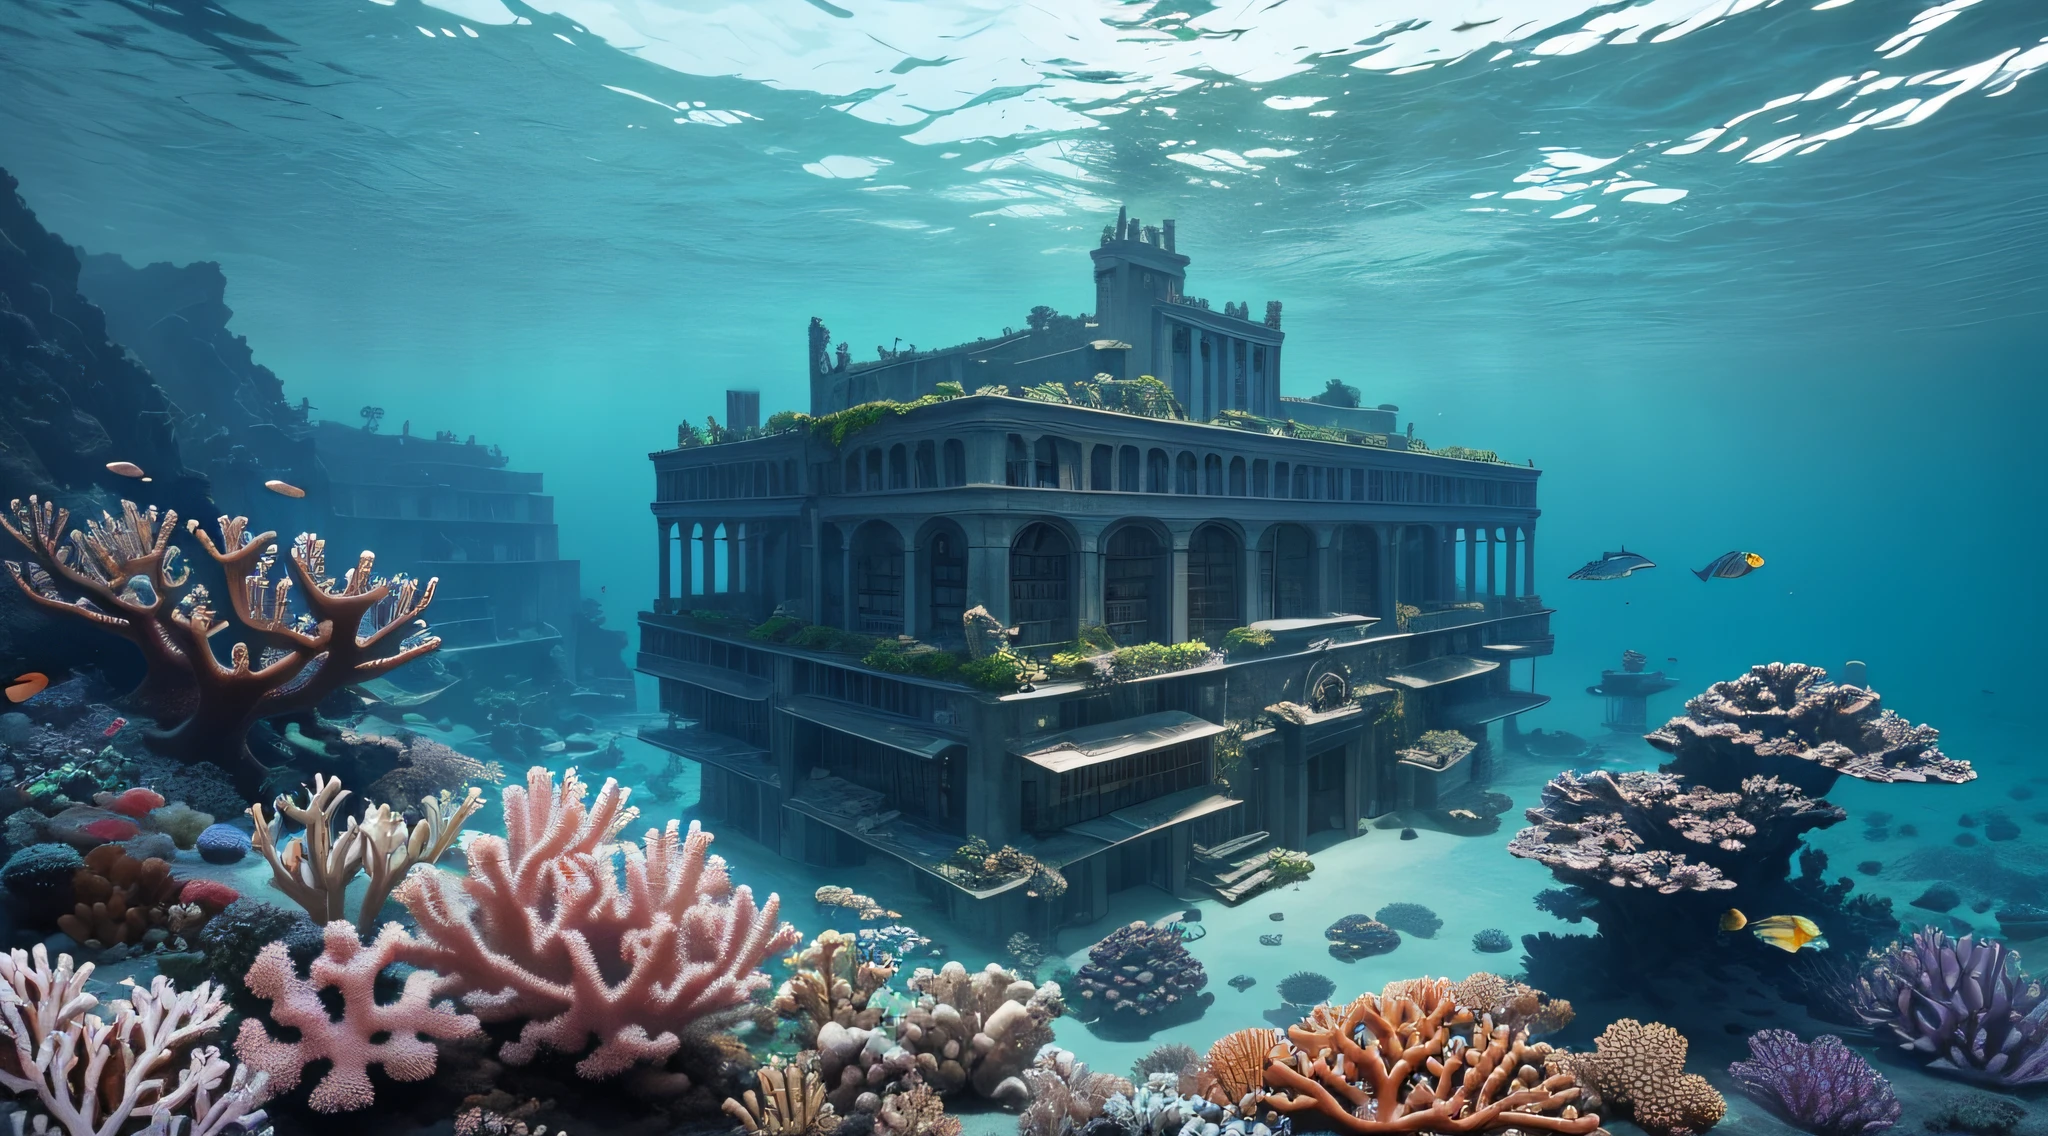 Generate an image of the Lost Library of Atlantis, nestled deep within the ocean, surrounded by enigmatic coral formations.